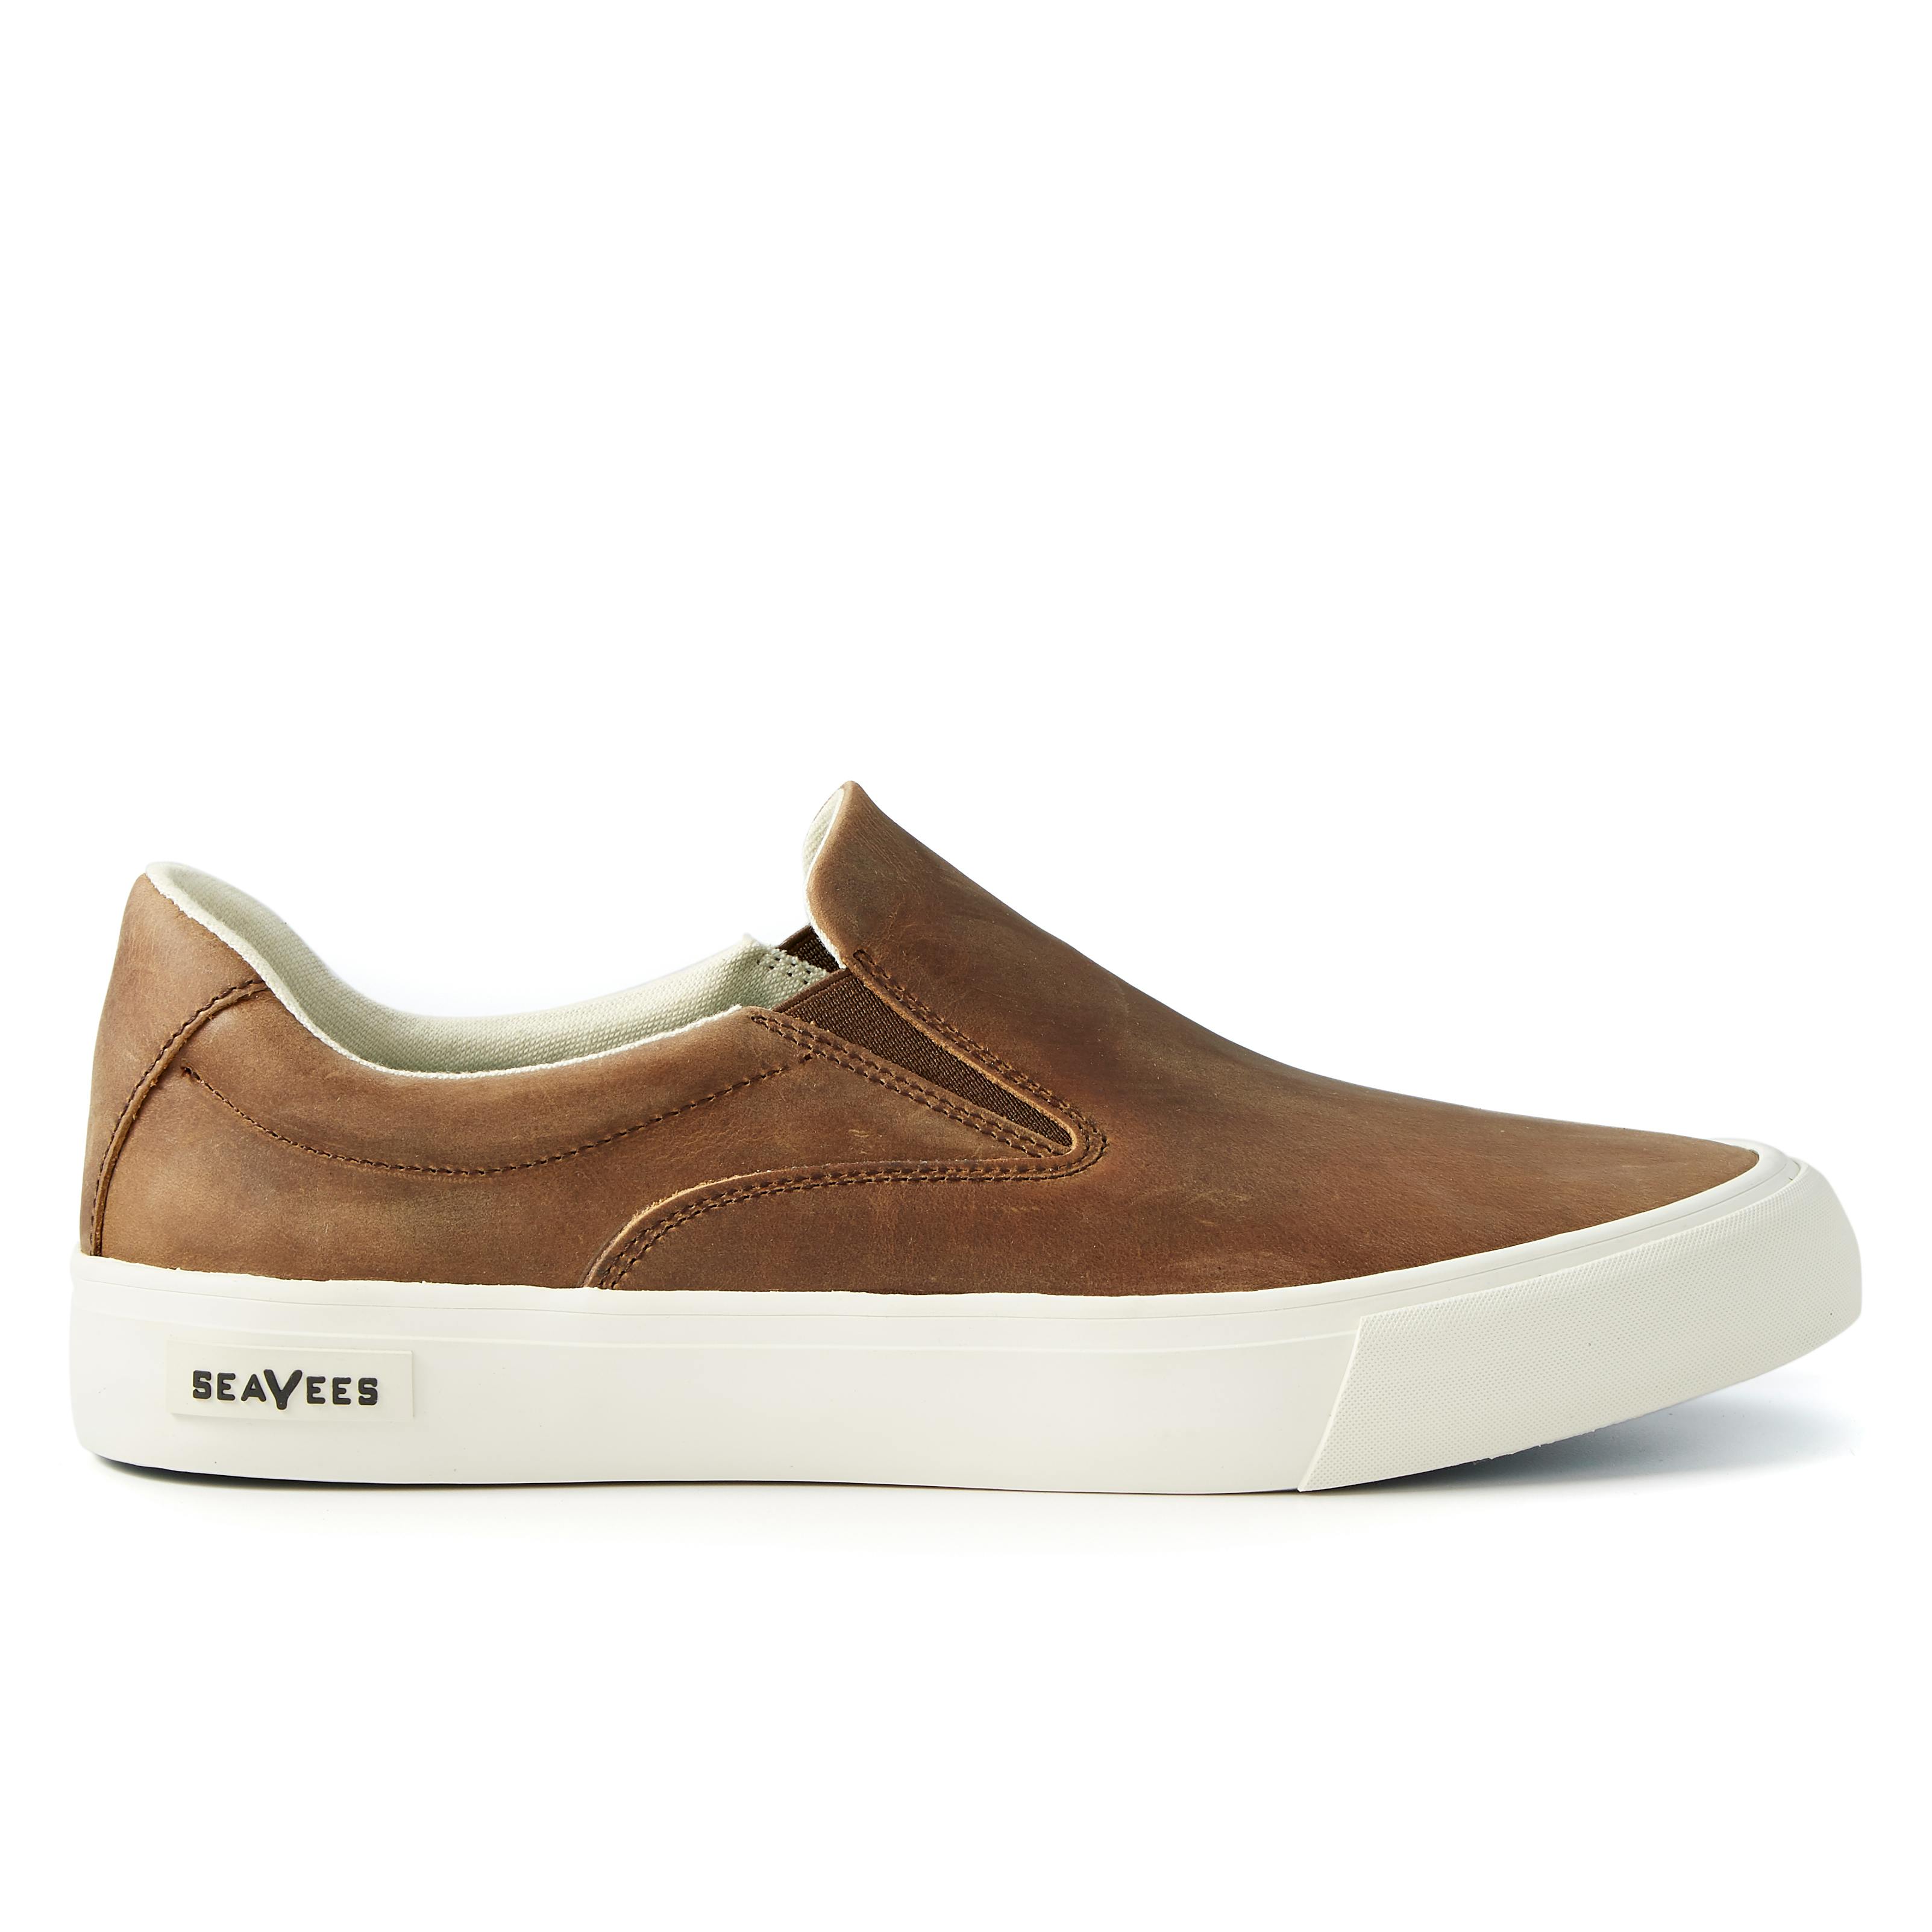 SeaVees Hawthorne Slip On Shoe - Rugged Leather | Casual Sneakers | Huckberry